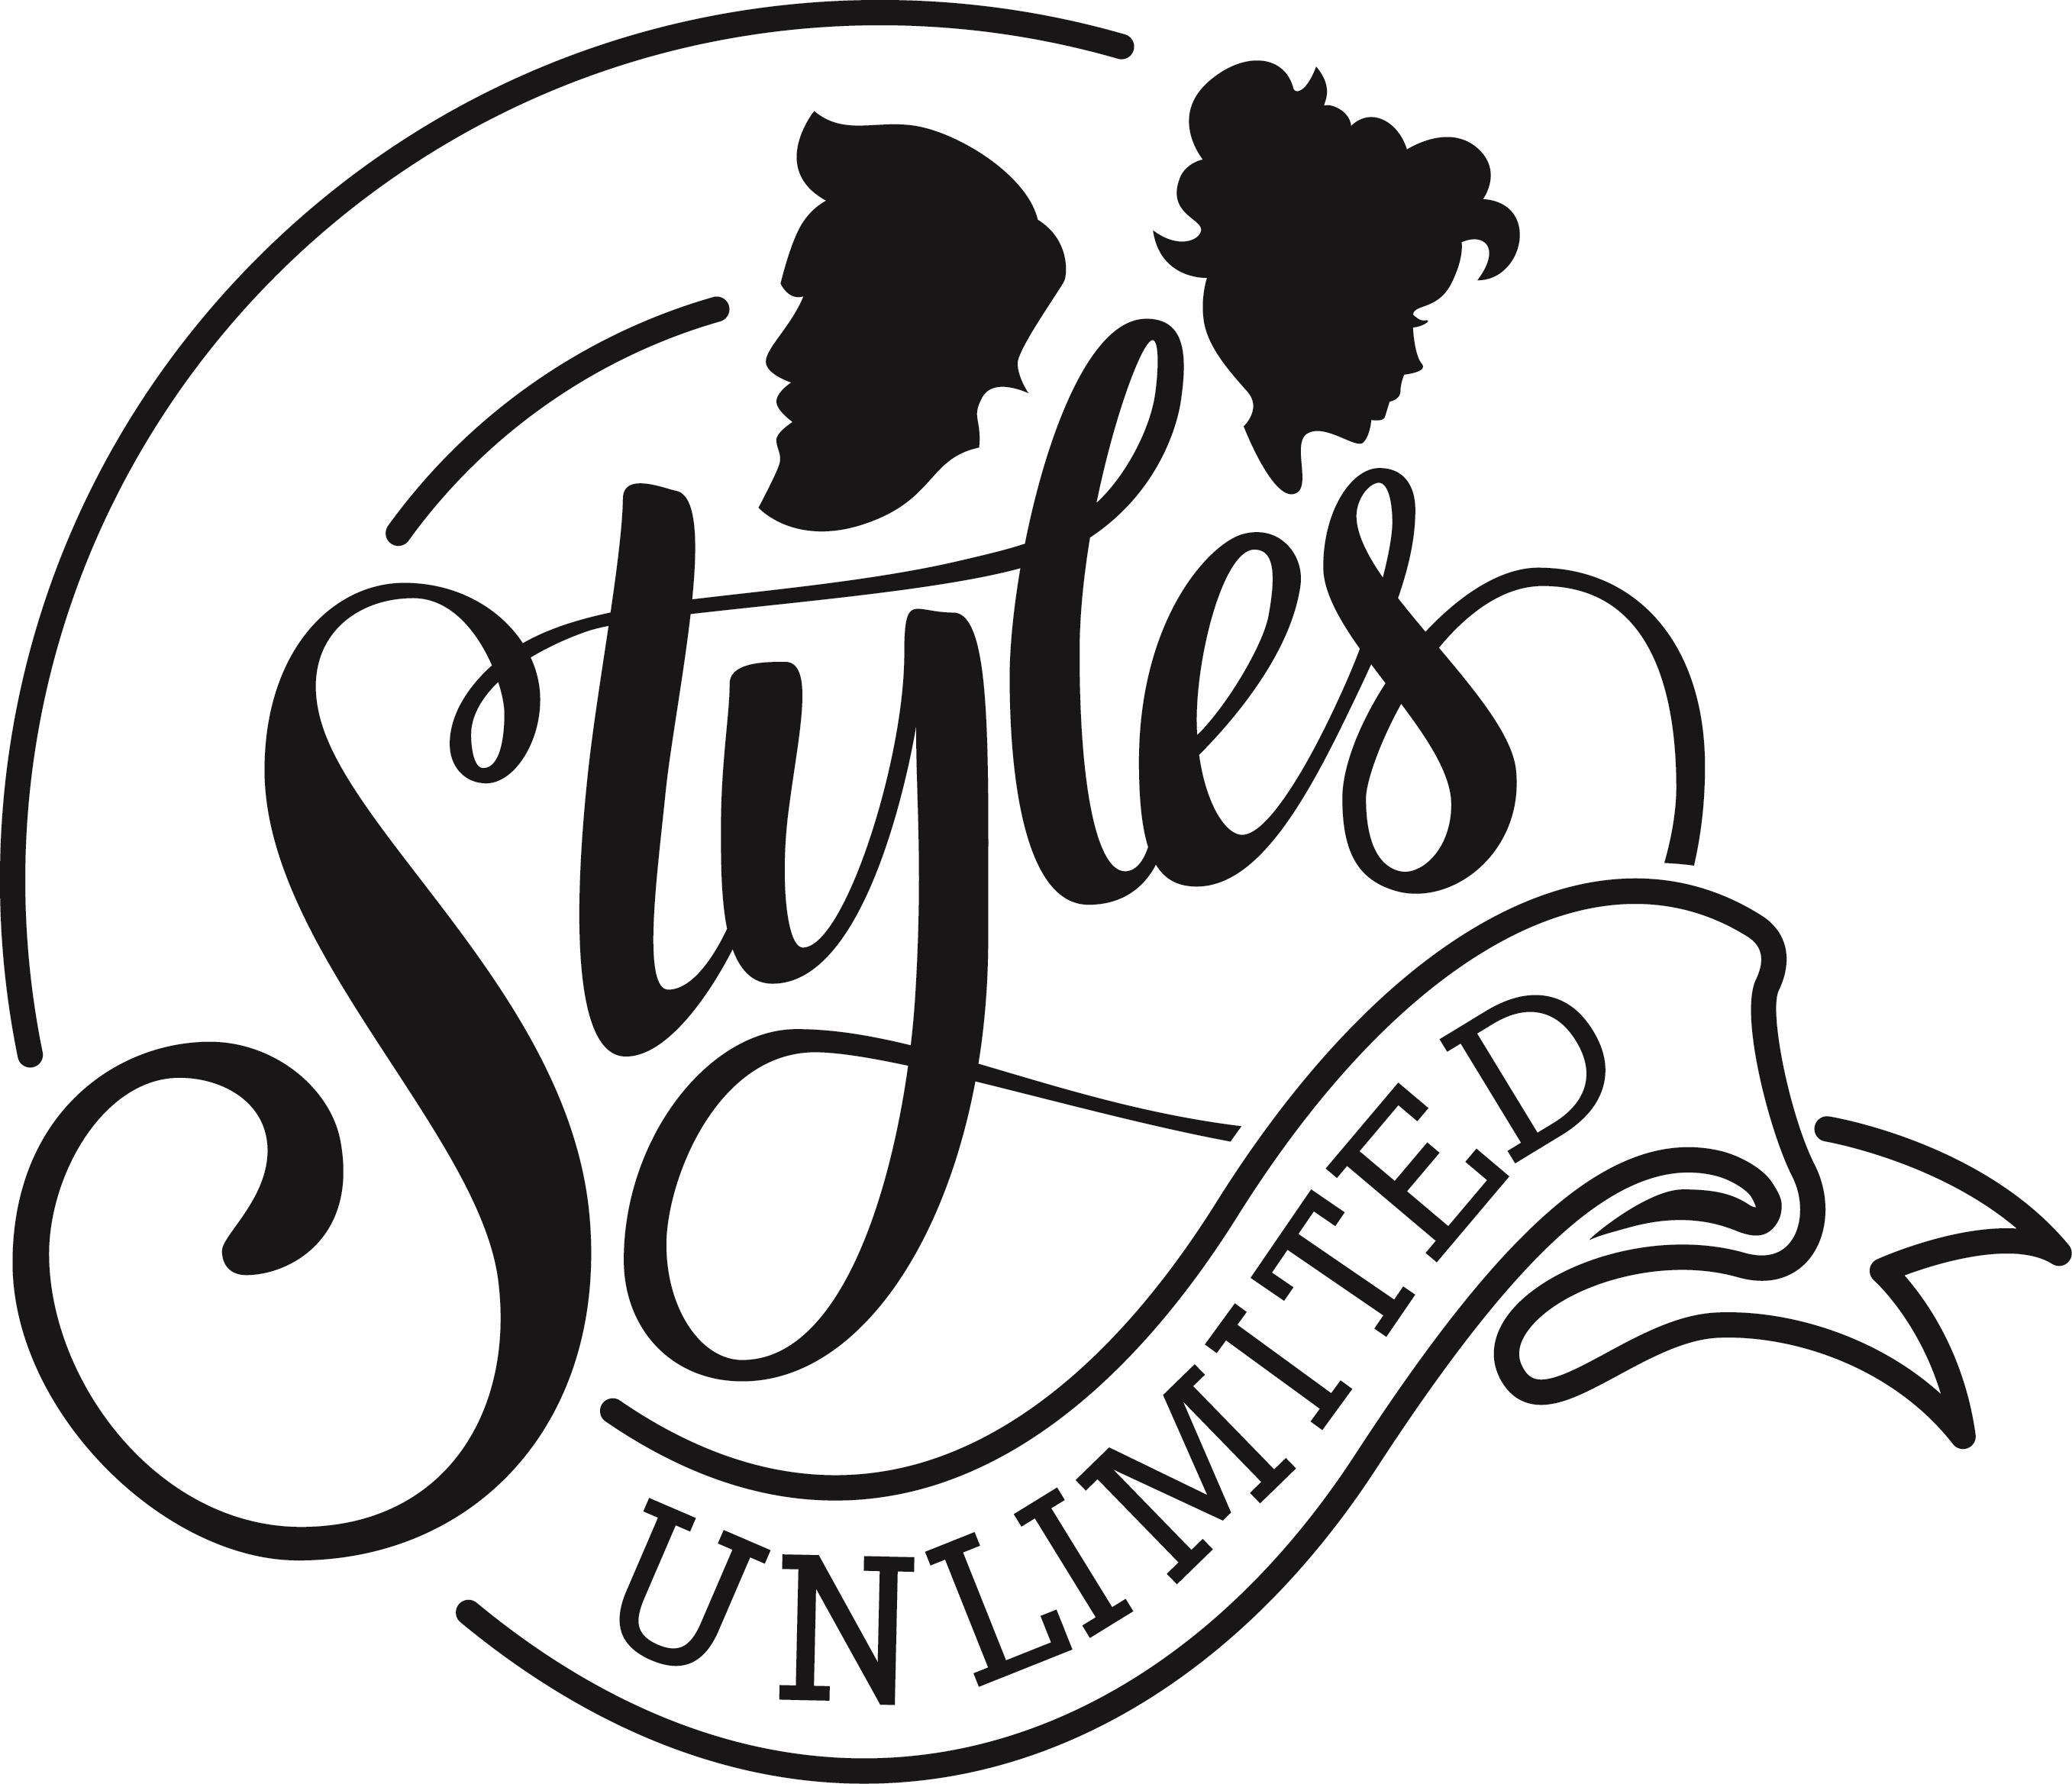 Styles Unlimited